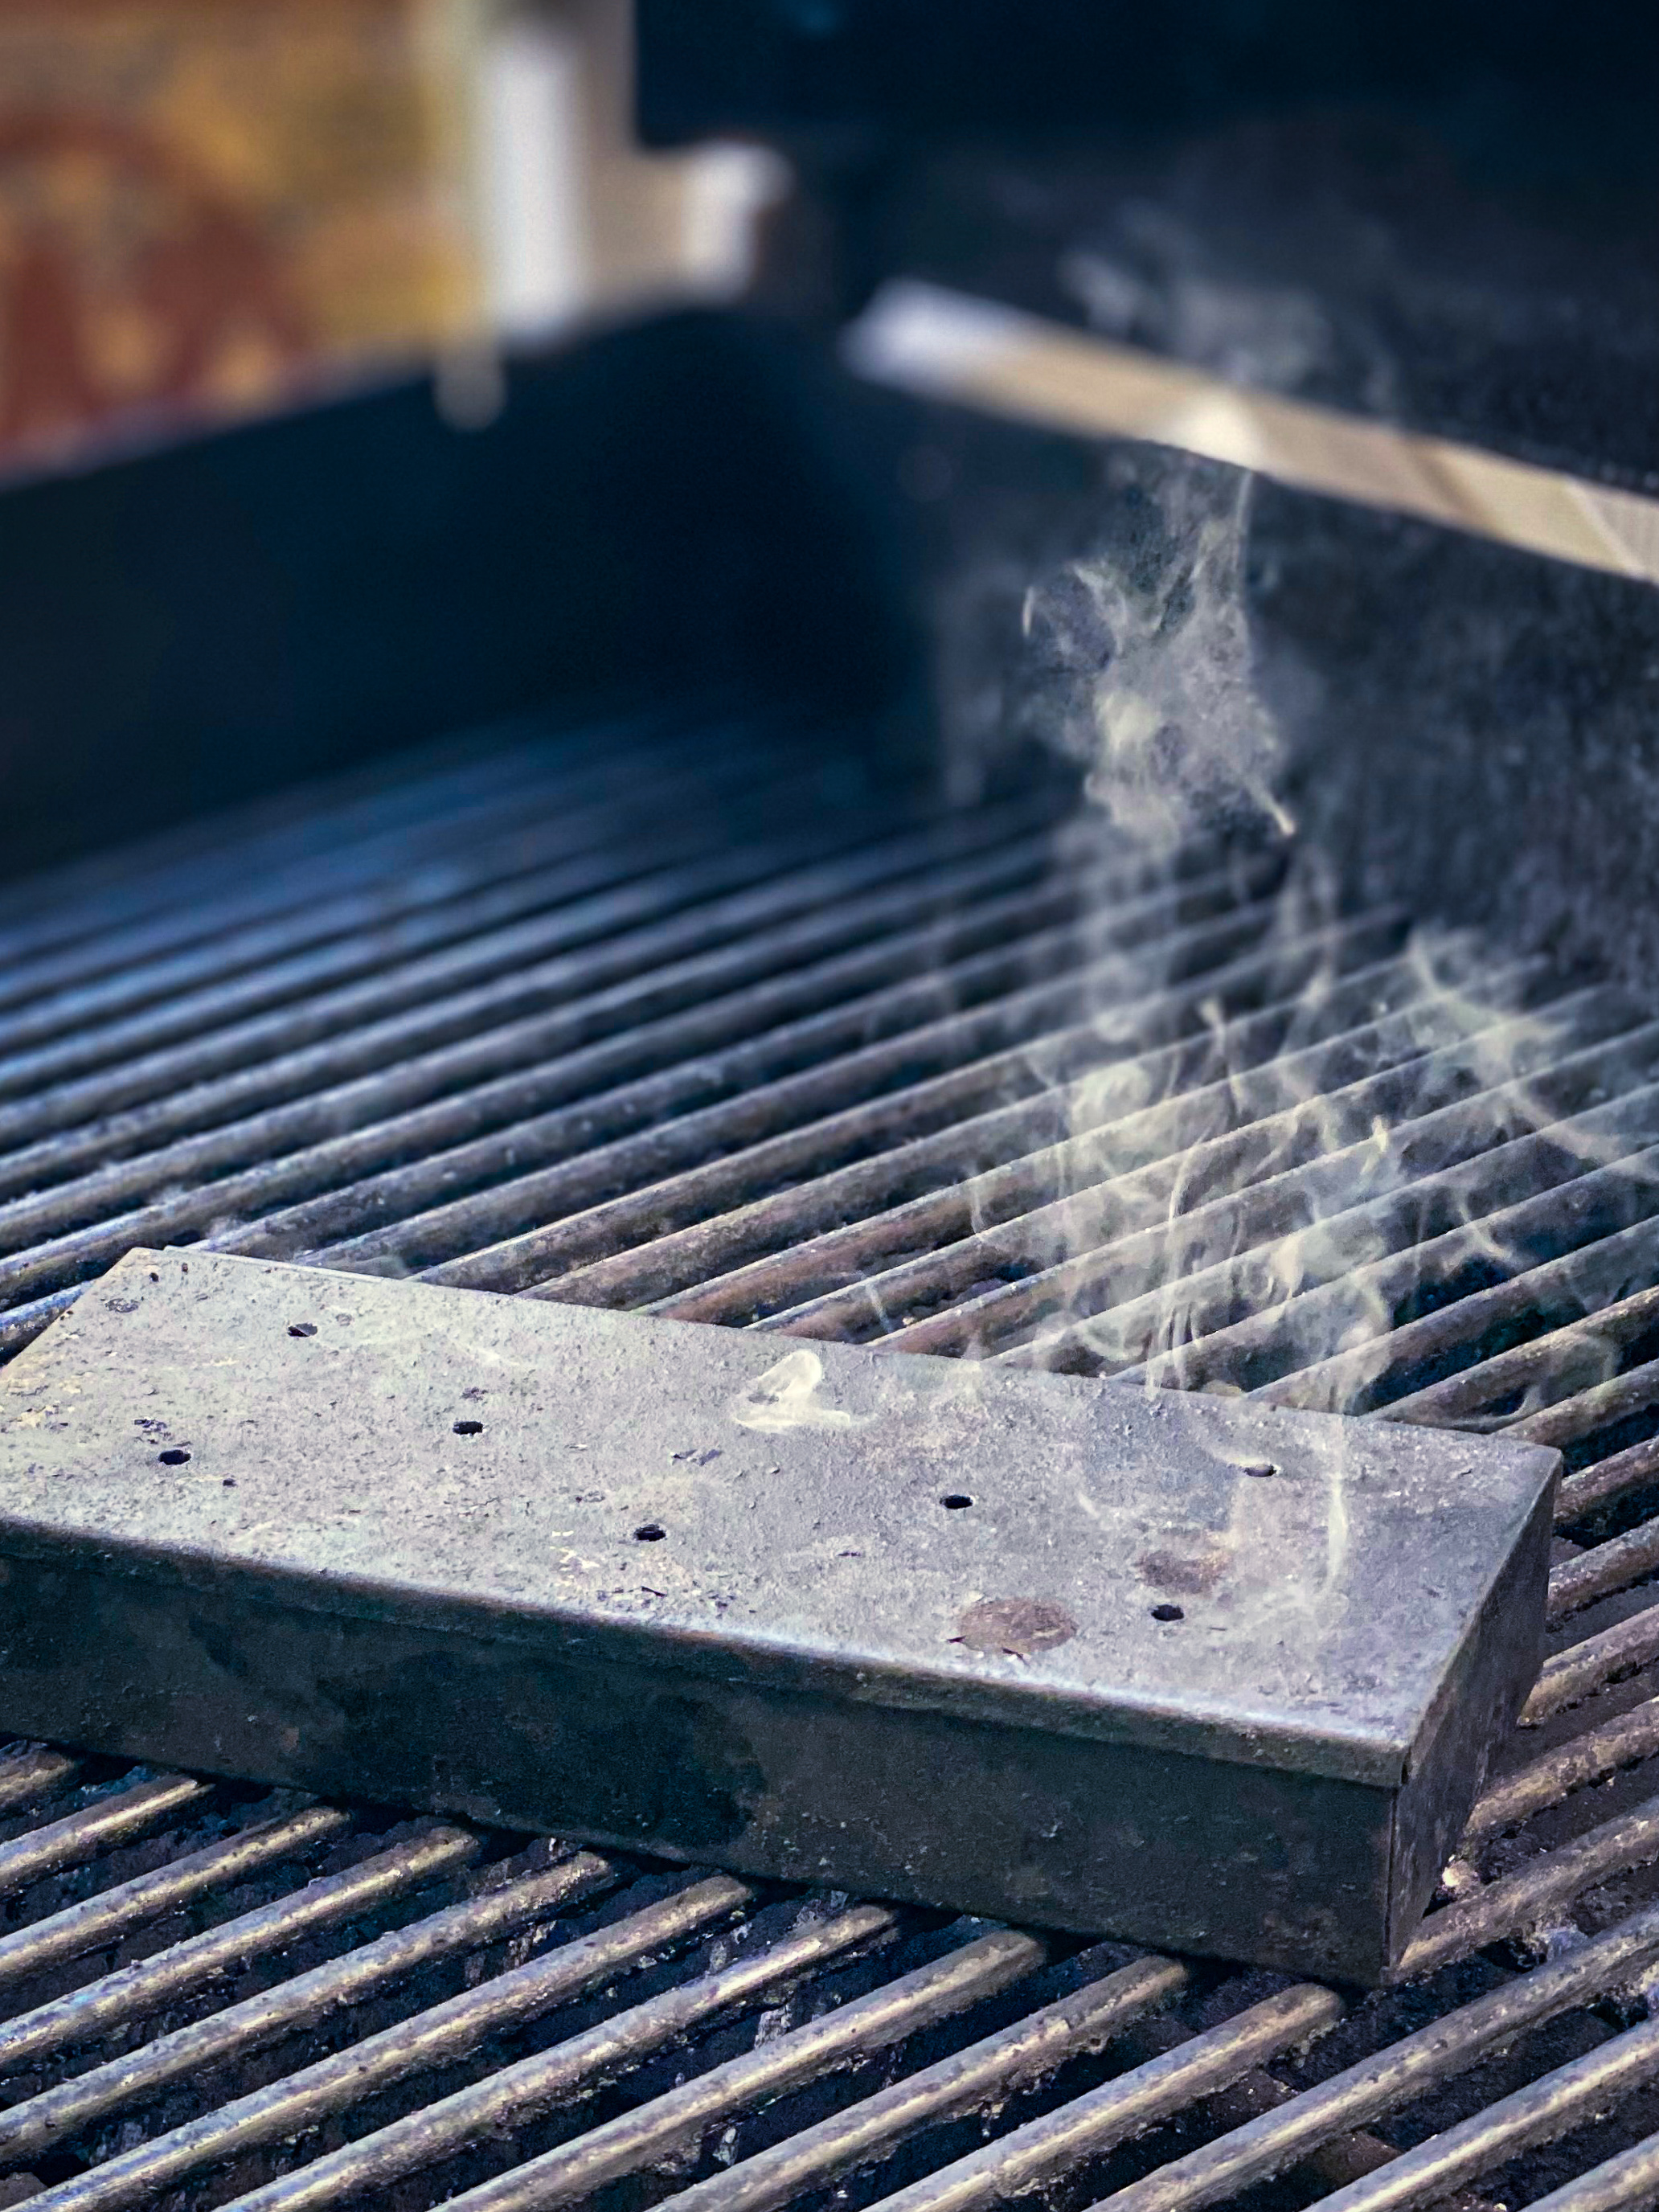 Smoke has begun to stream from a smoker box on gas grill. 
